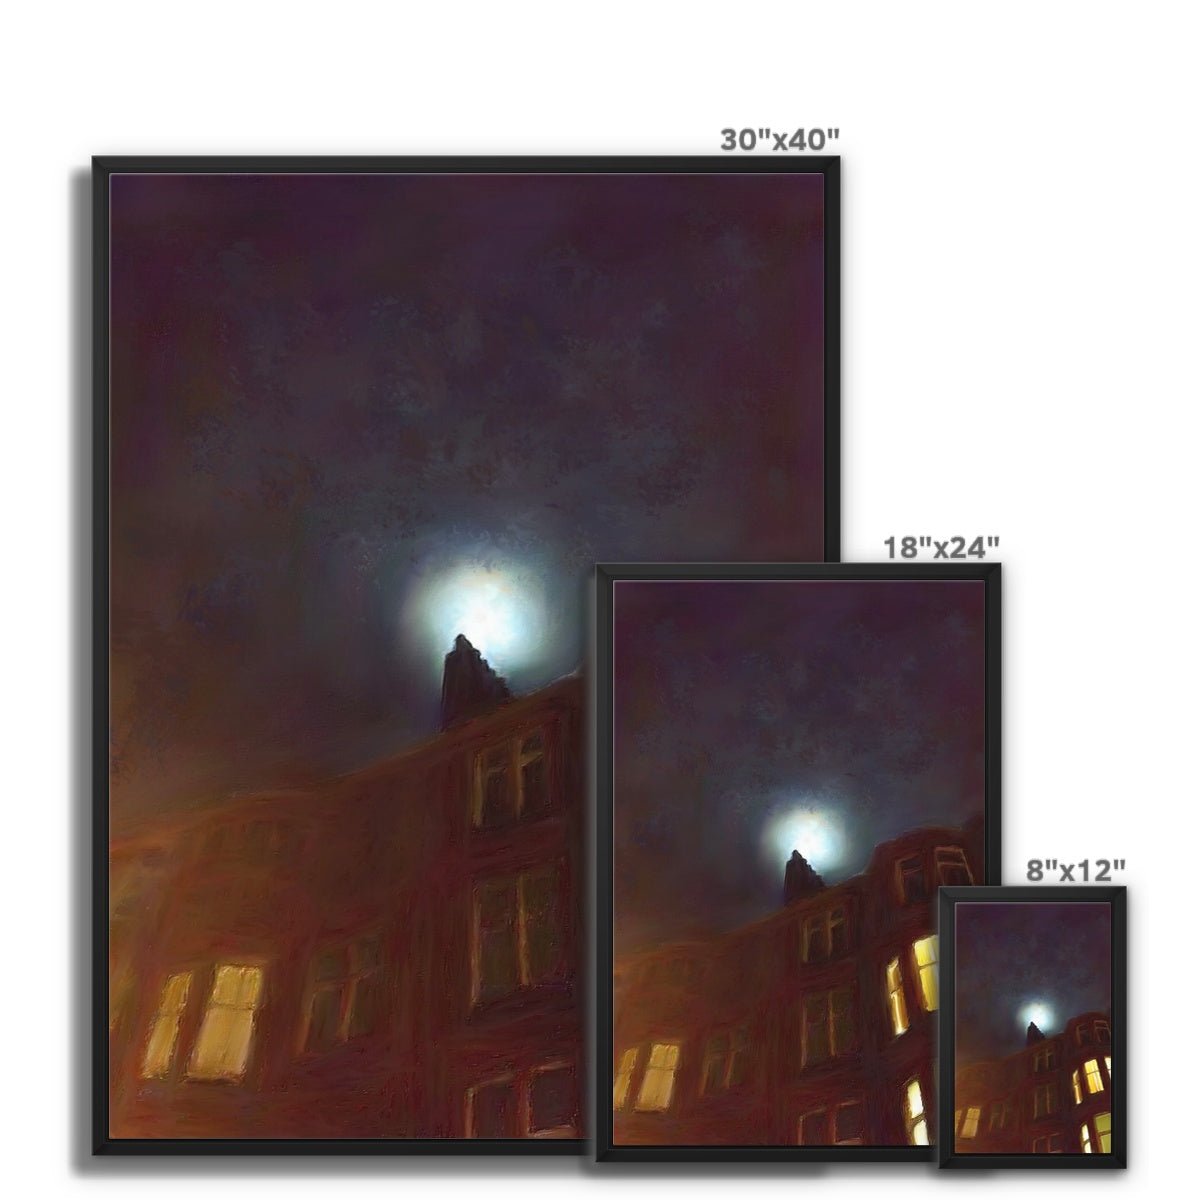 A Moonlit Tenement Painting | Framed Canvas From Scotland-Floating Framed Canvas Prints-Edinburgh & Glasgow Art Gallery-Paintings, Prints, Homeware, Art Gifts From Scotland By Scottish Artist Kevin Hunter